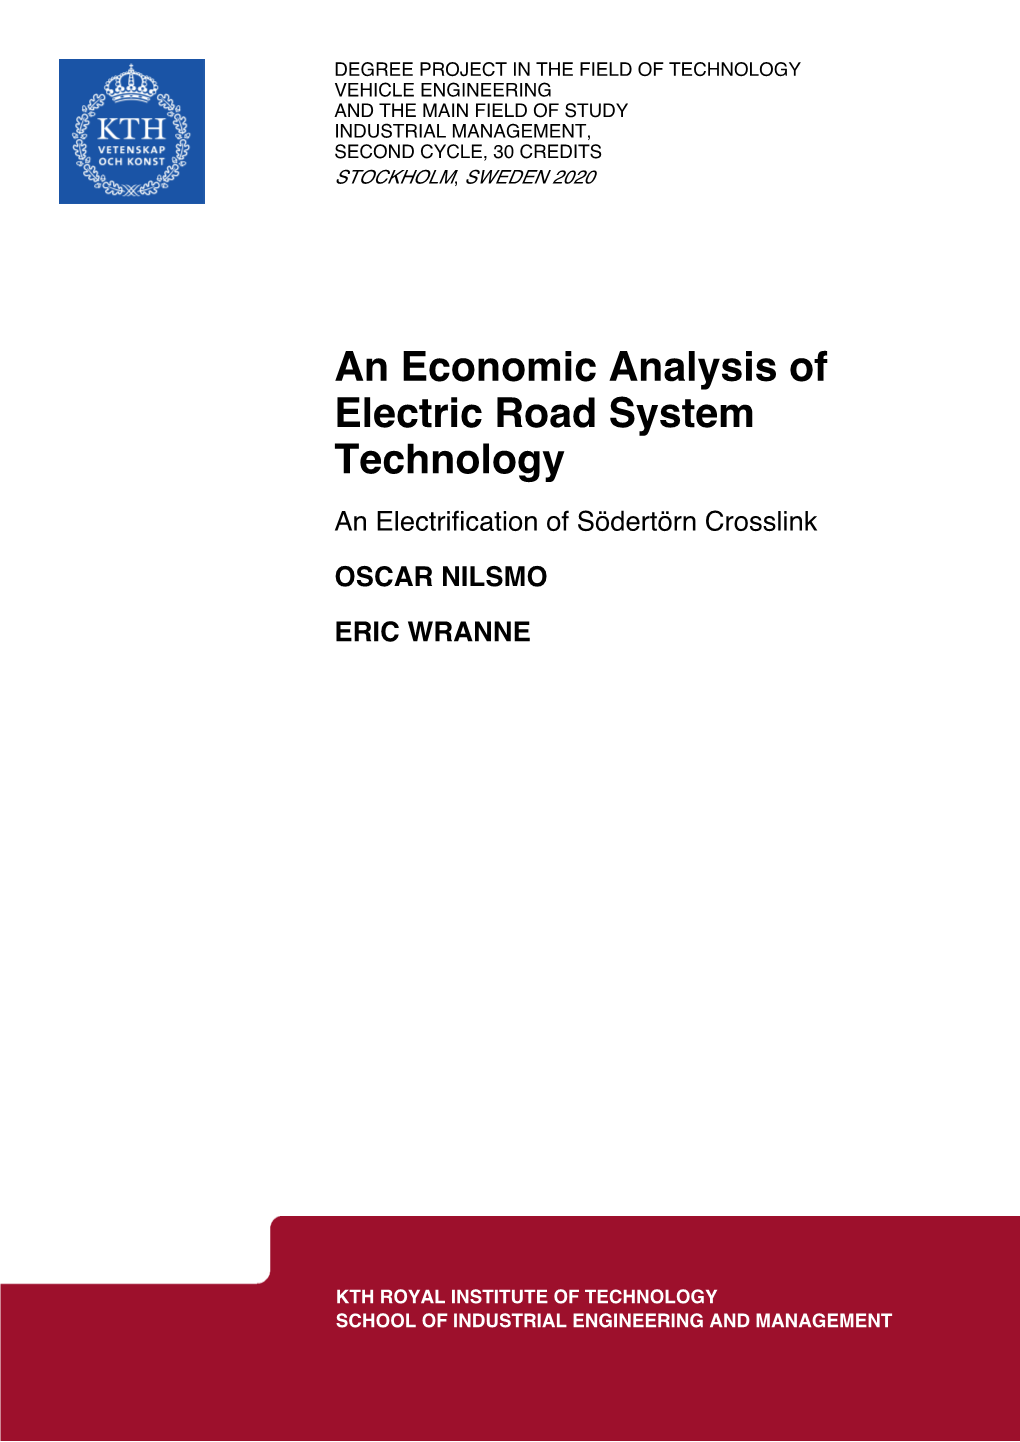 An Economic Analysis of Electric Road System Technology an Electrification of Södertörn Crosslink